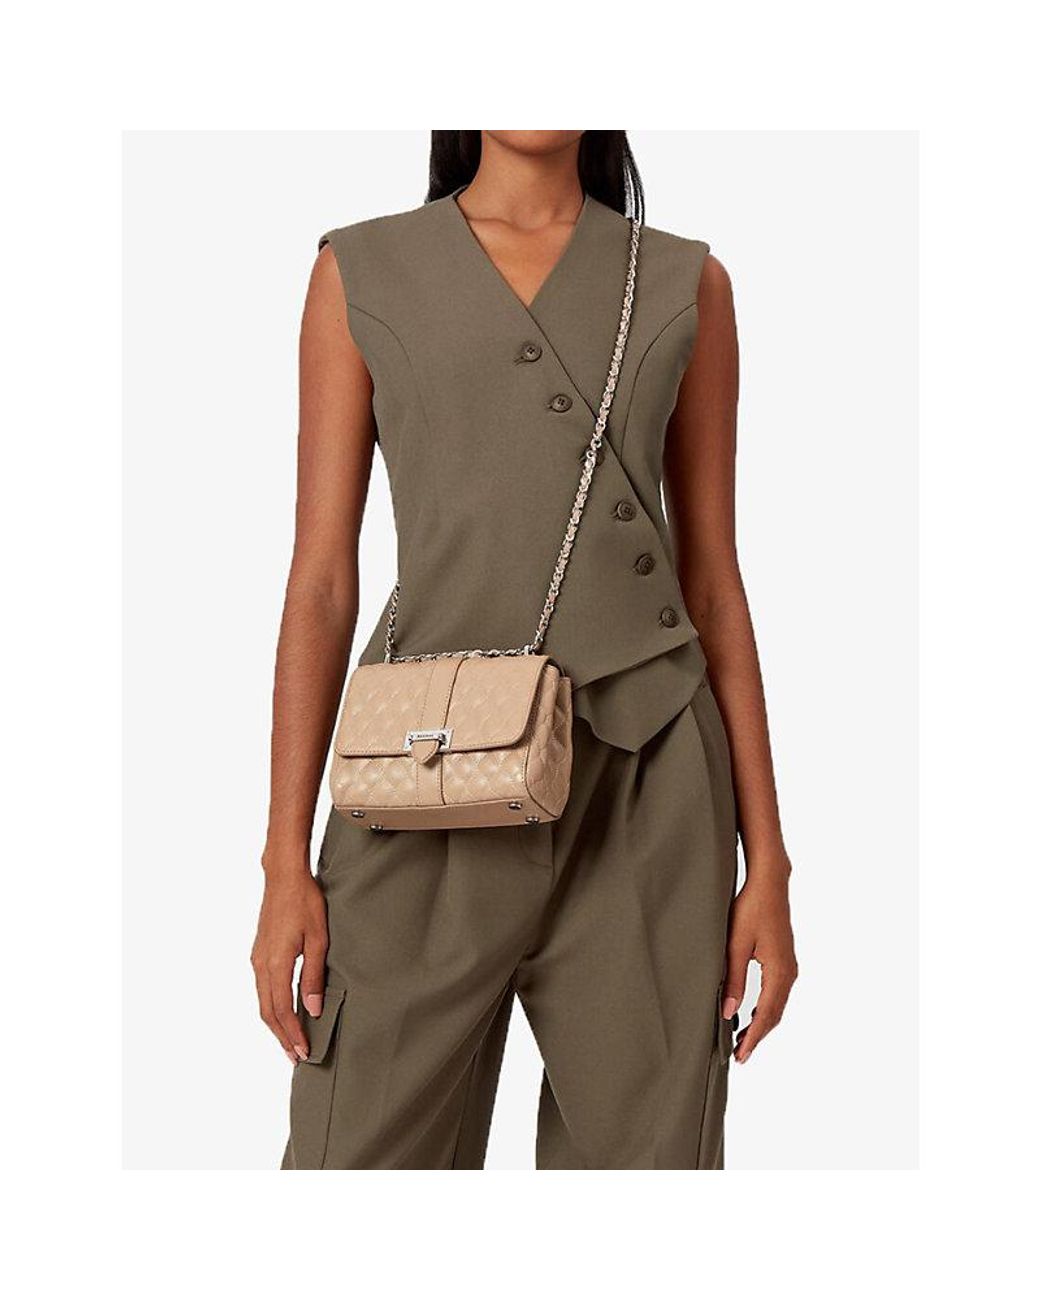 Aspinal of London Lottie Quilted Leather Shoulder Bag in Natural | Lyst